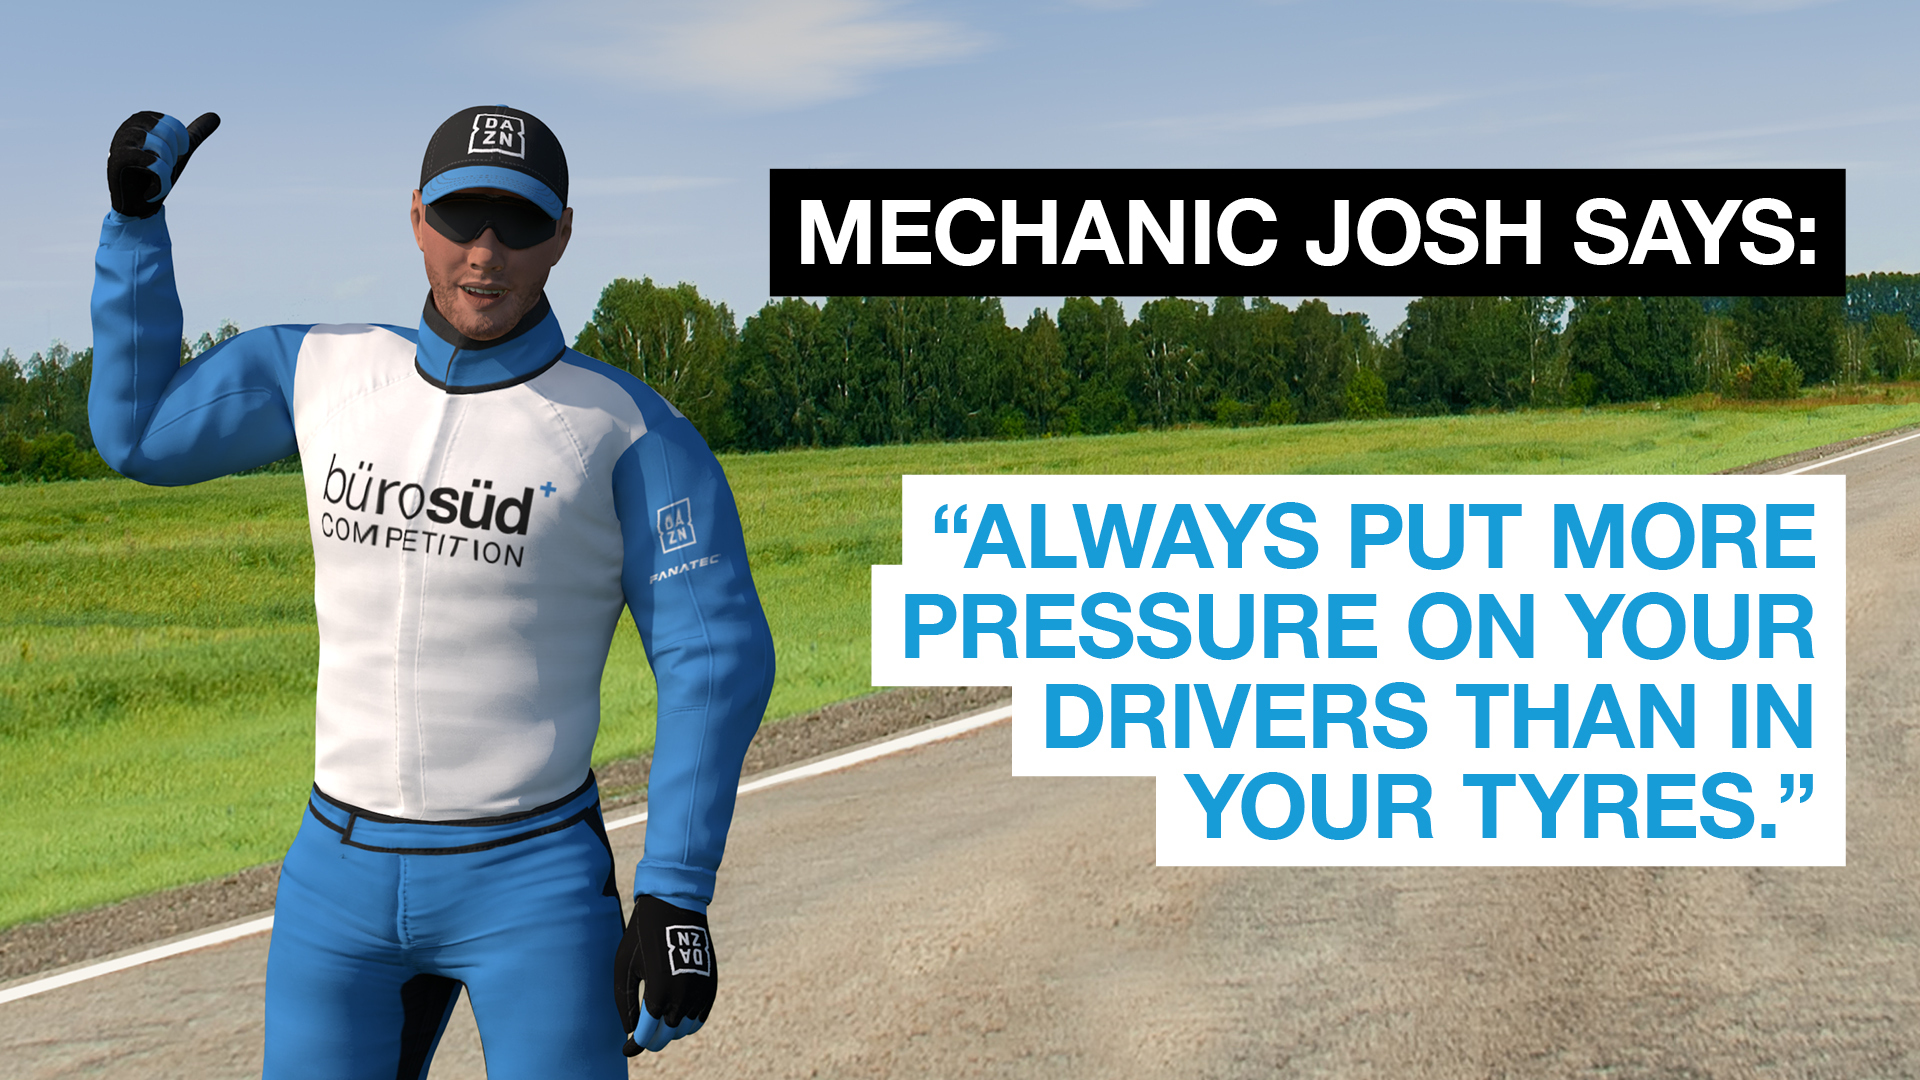 Mechanic Josh - BS+COMPETITION's own creation. The most dedicated mechanic in sim racing.